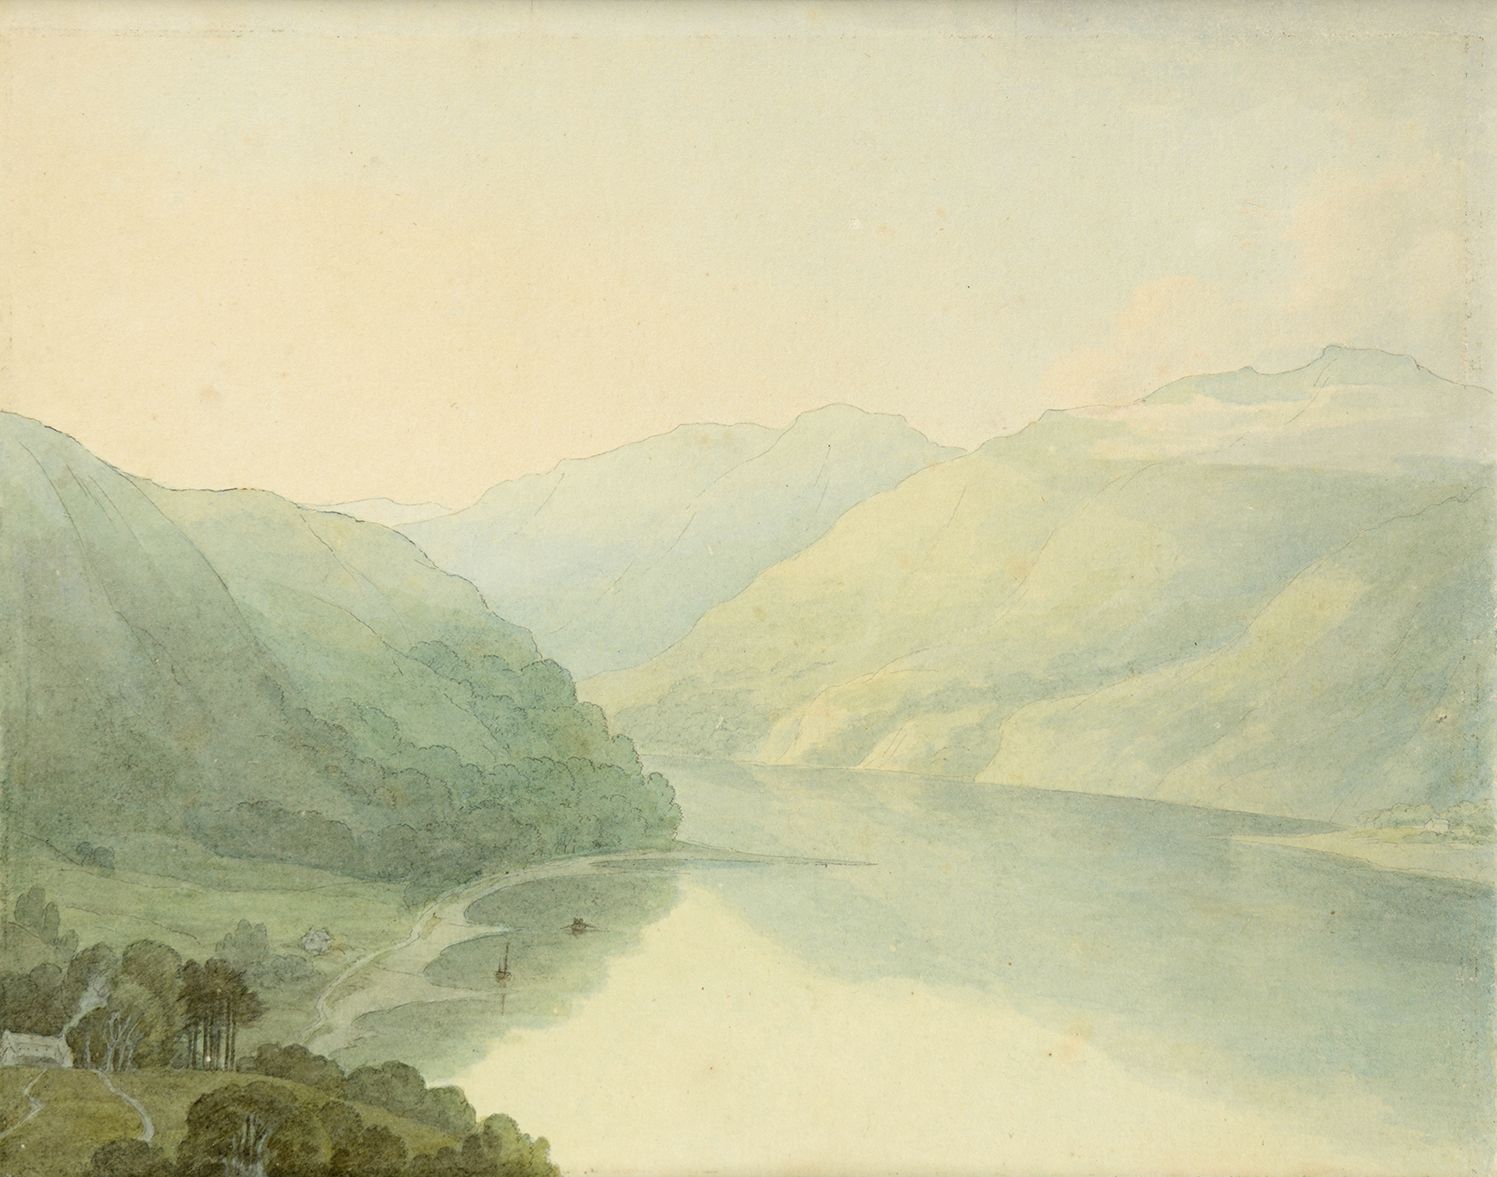 John White Abbott, British, 1764–1851: Loch Long from Hills near Arrochar, Scotland at 5 in the Morning, 1791. Watercolor with pen and gray ink, over graphite, on cream wove paper. Museum purchase, Surdna Fund (2017-216)